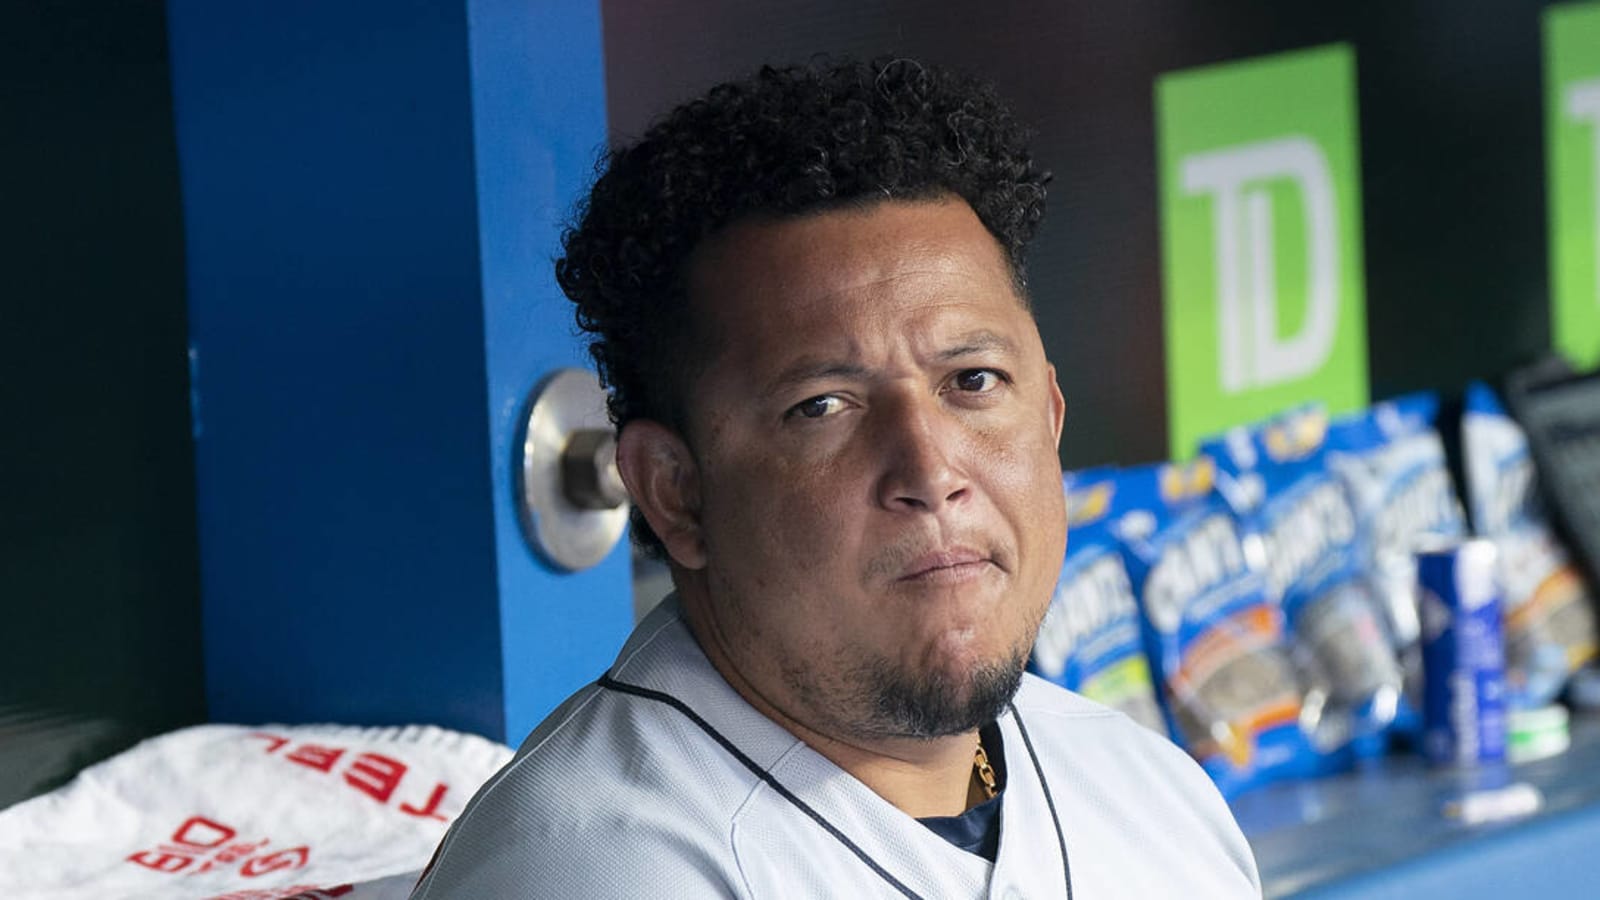 Tigers' Miguel Cabrera had easy day at the ballpark on Thursday